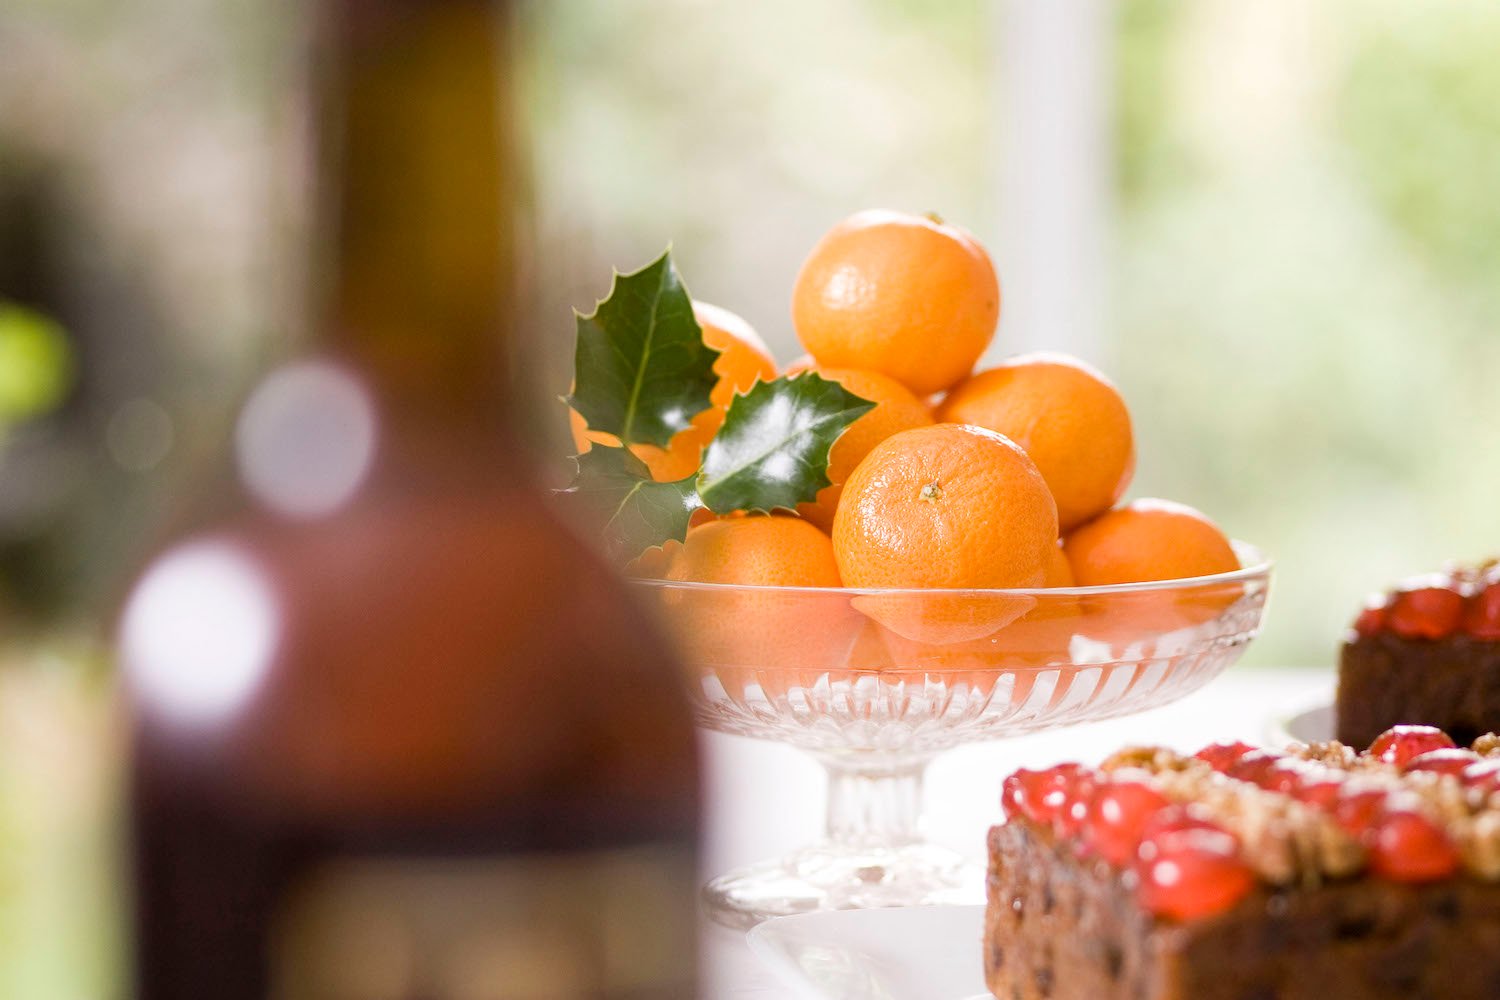 Glass bowl of satsumas with a bottle of sherry in the foreground